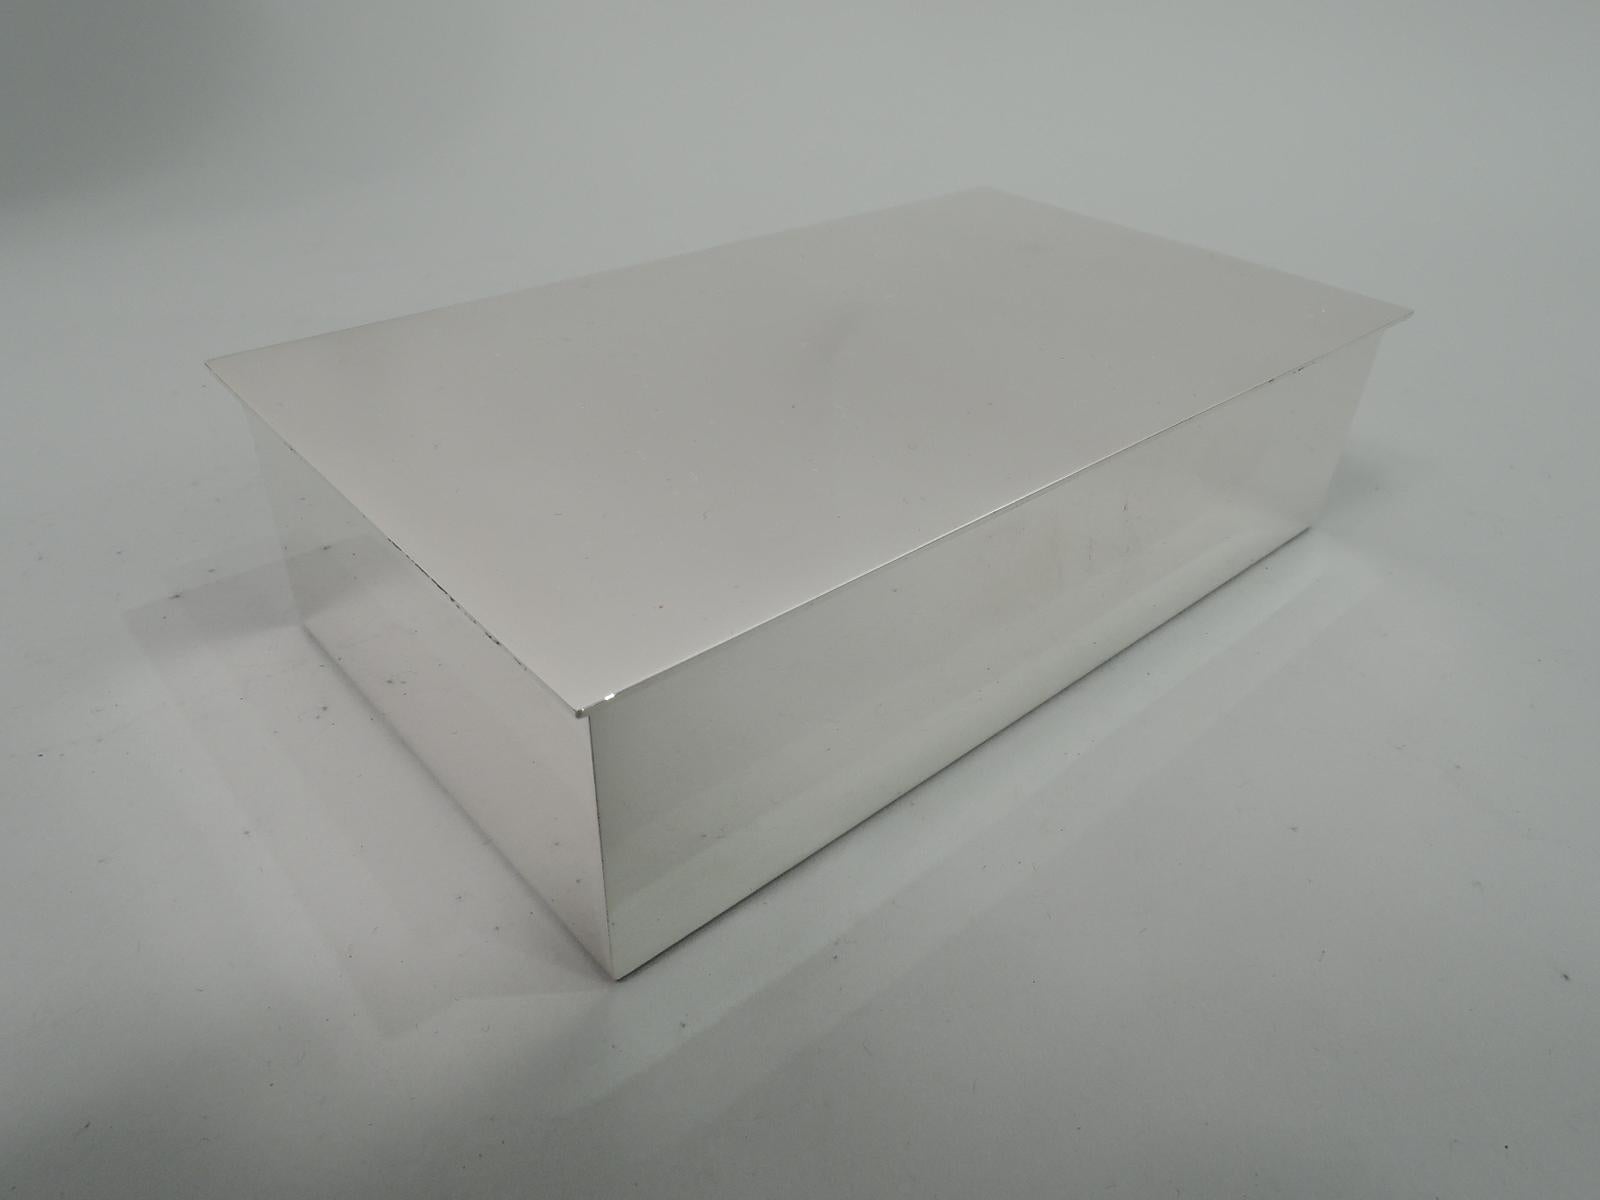 Mid-Century Modern sterling silver box. Made by Tiffany & Co. in New York. Rectangular with straight sides and crisp corners. Cover is hinged and flat with slight overhang. Box interior cedar lined. Fully marked including maker’s stamp and postwar